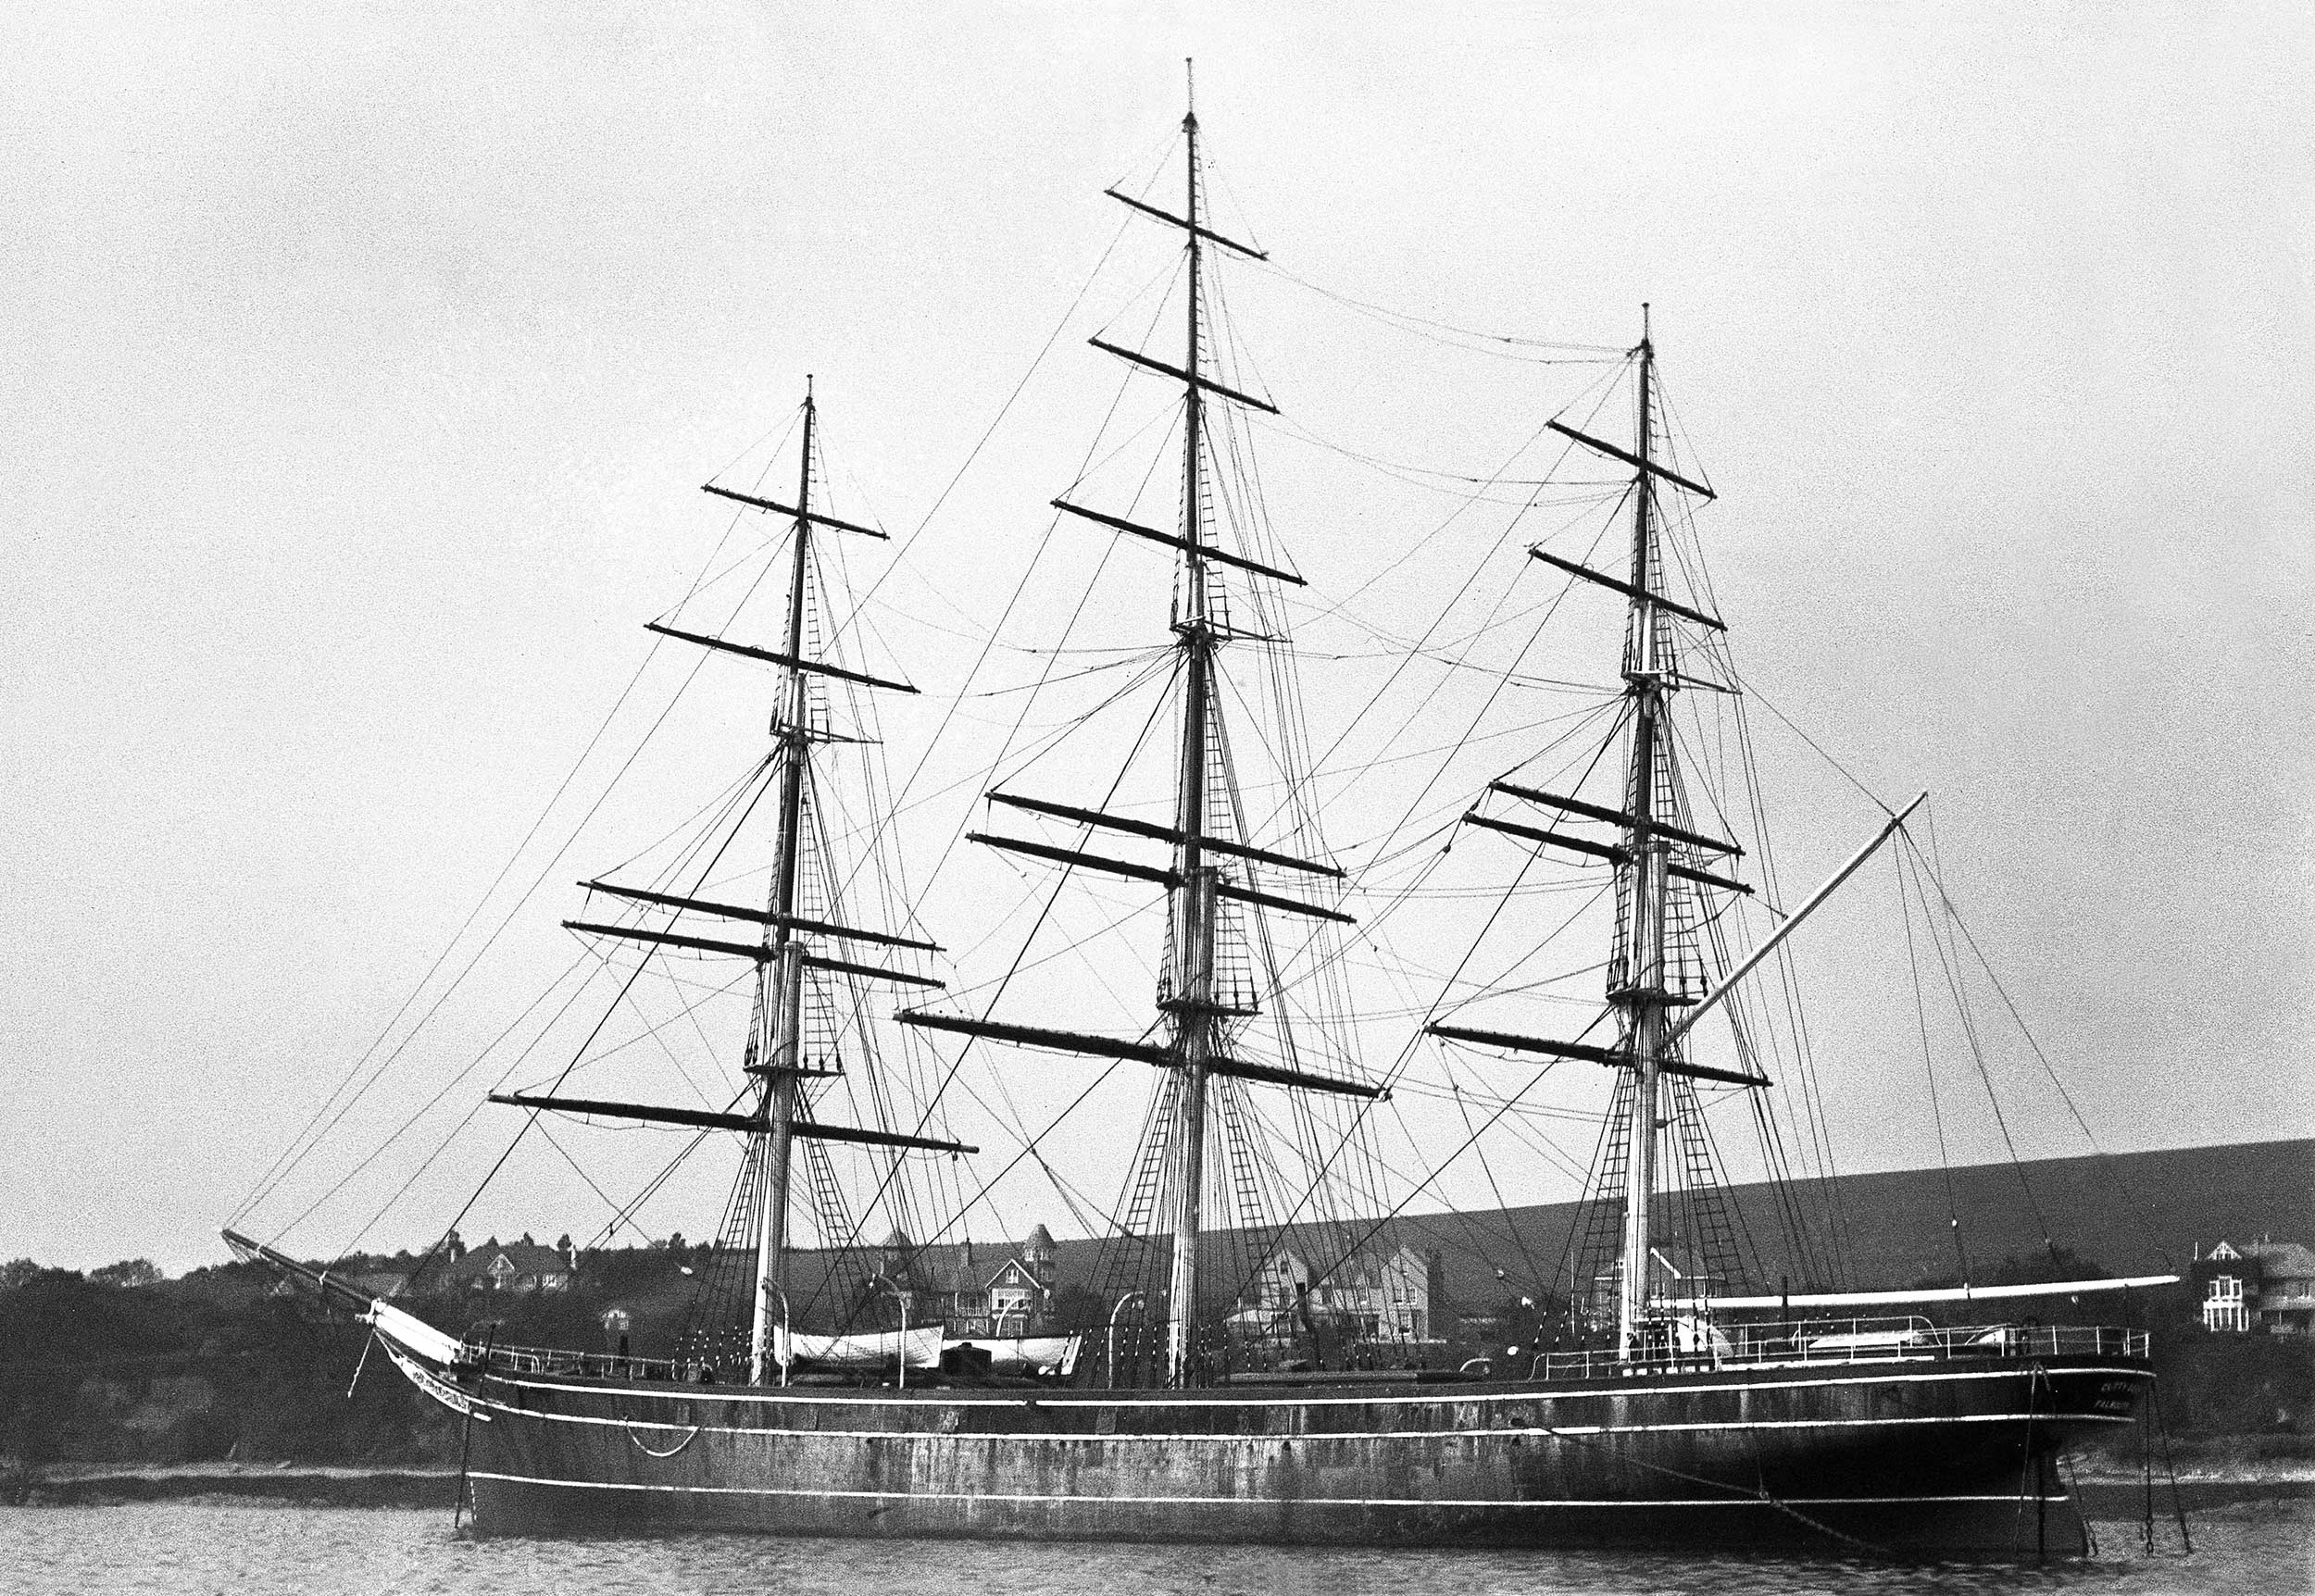 A black and white photo of the Cutty Sark.